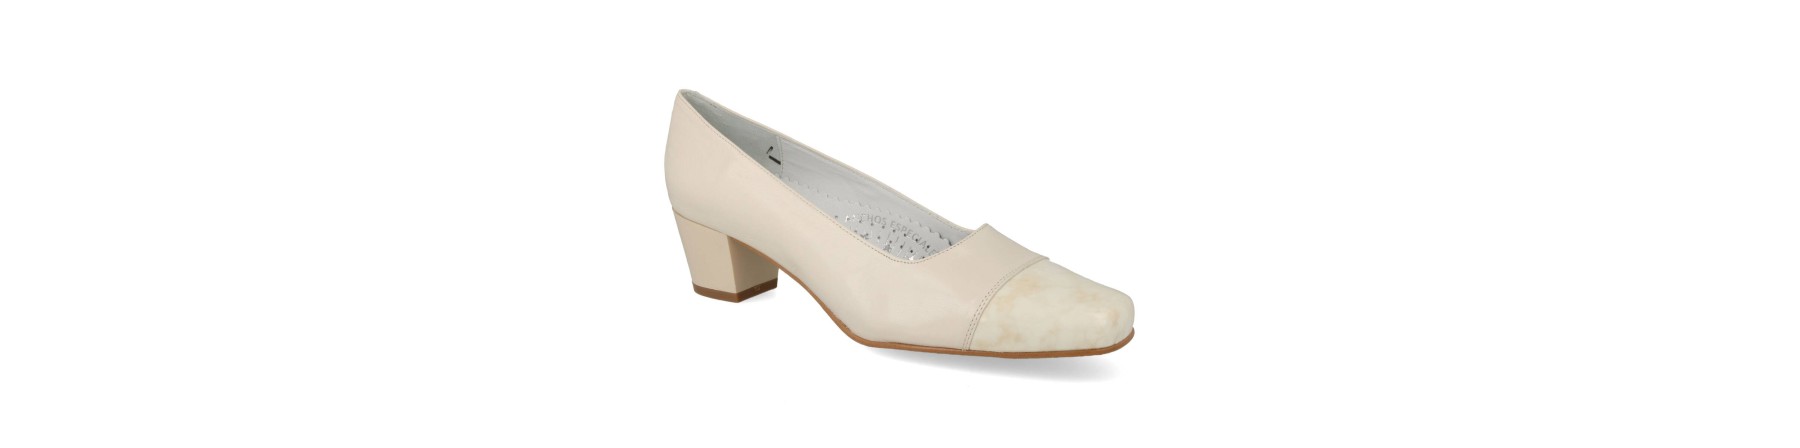 ZAPATOS OUTLET MUJER PIEL MOD. KONG BEIGE